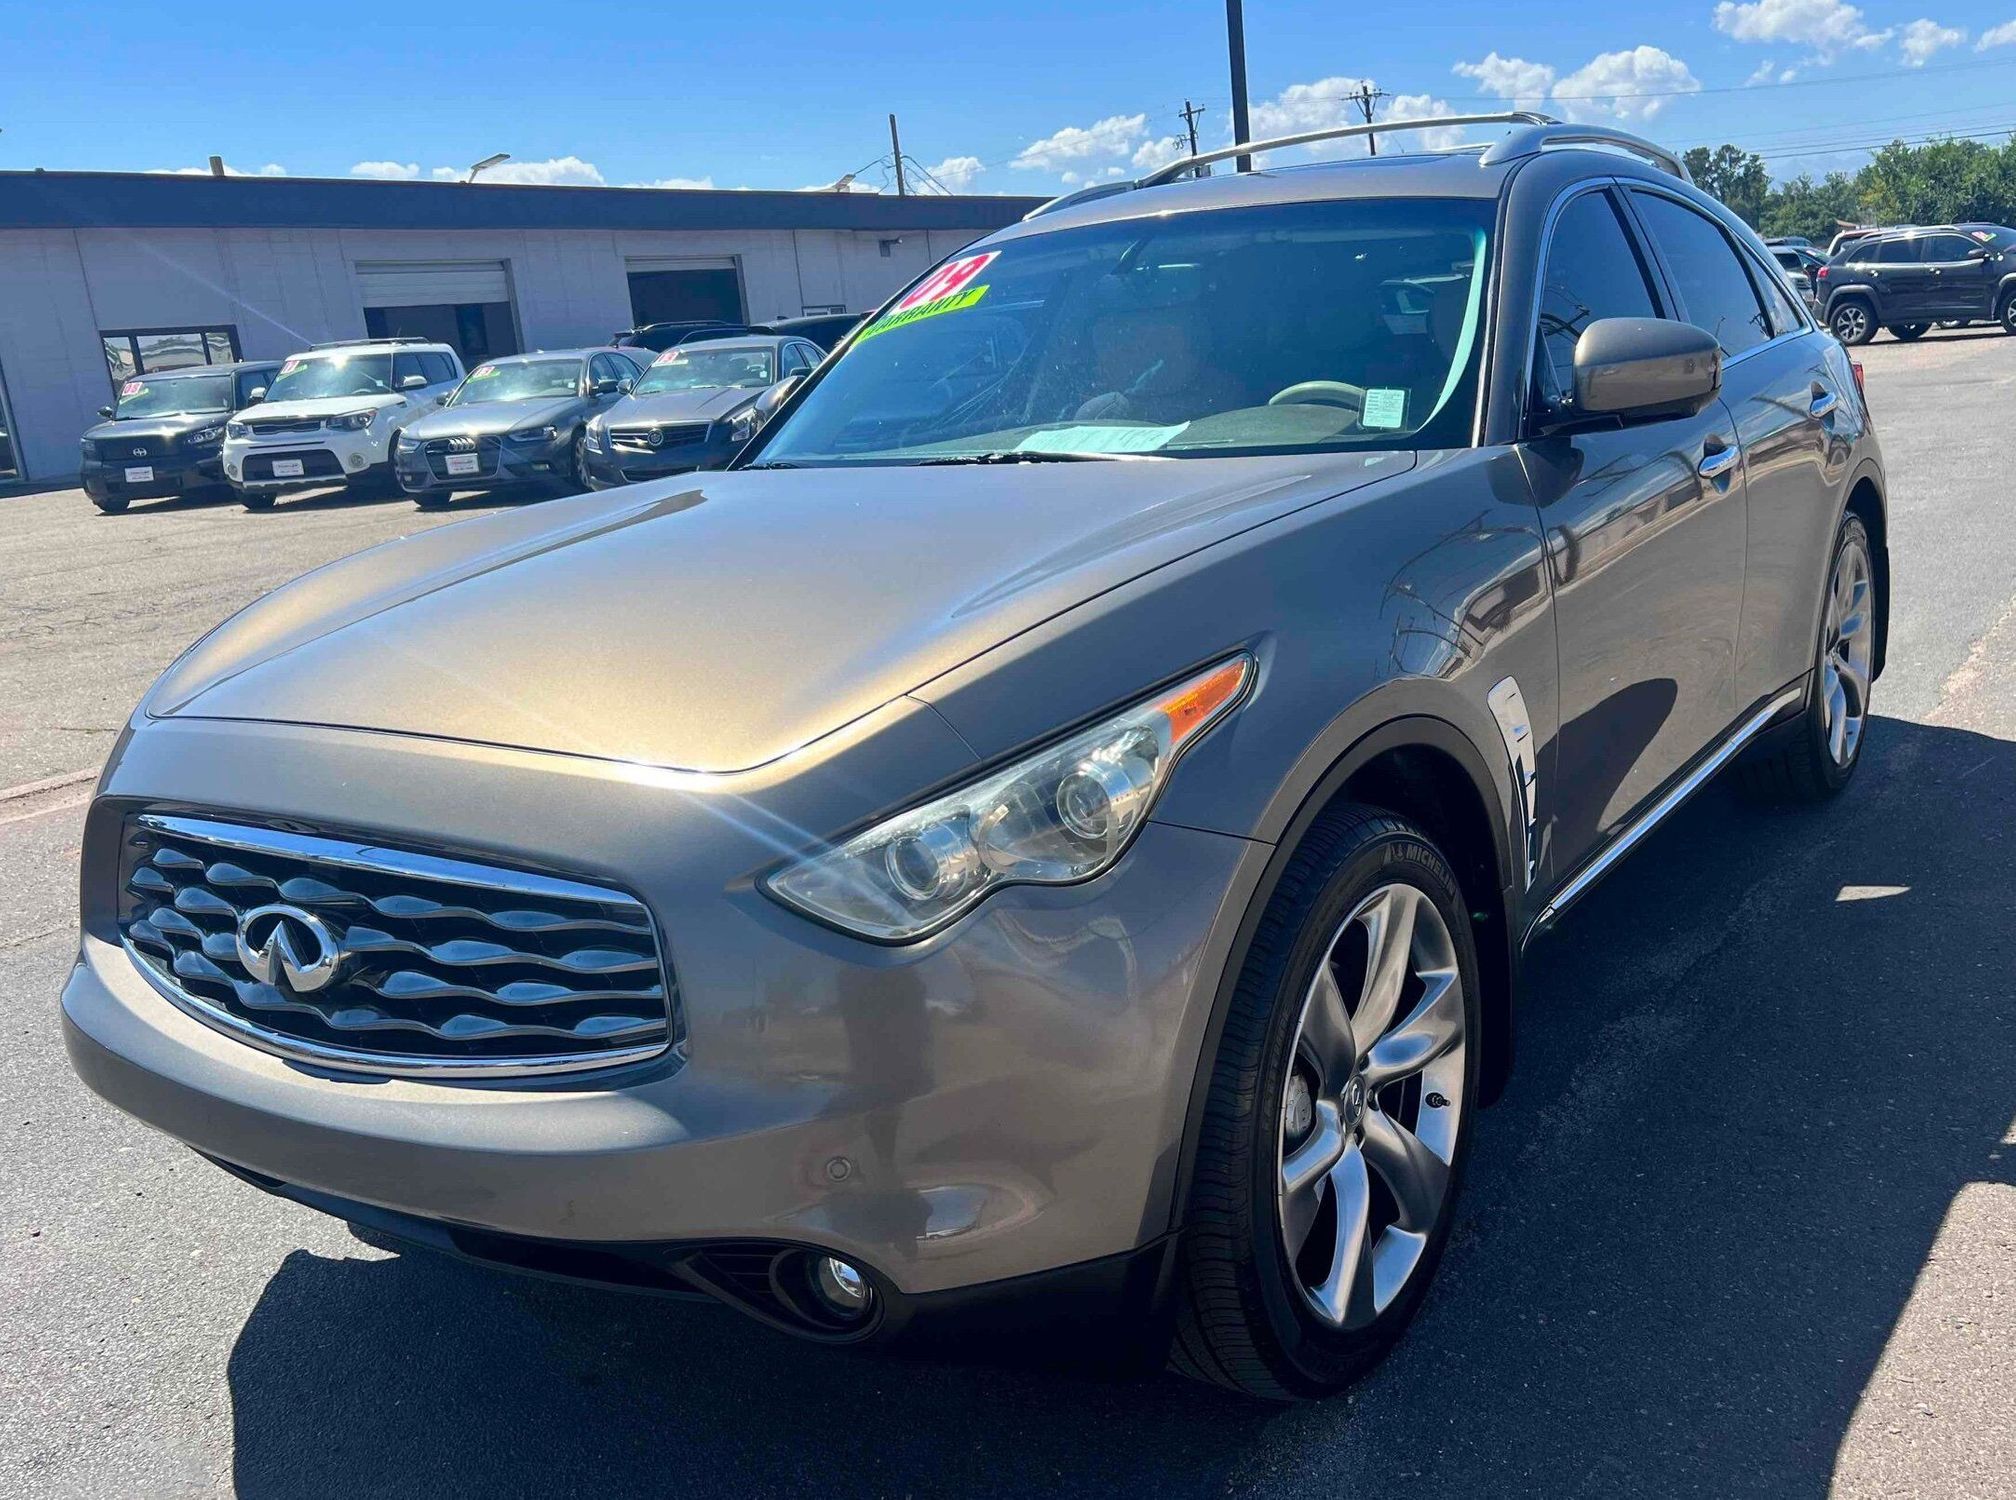 Used Infiniti Fx50's nationwide for sale - MotorCloud